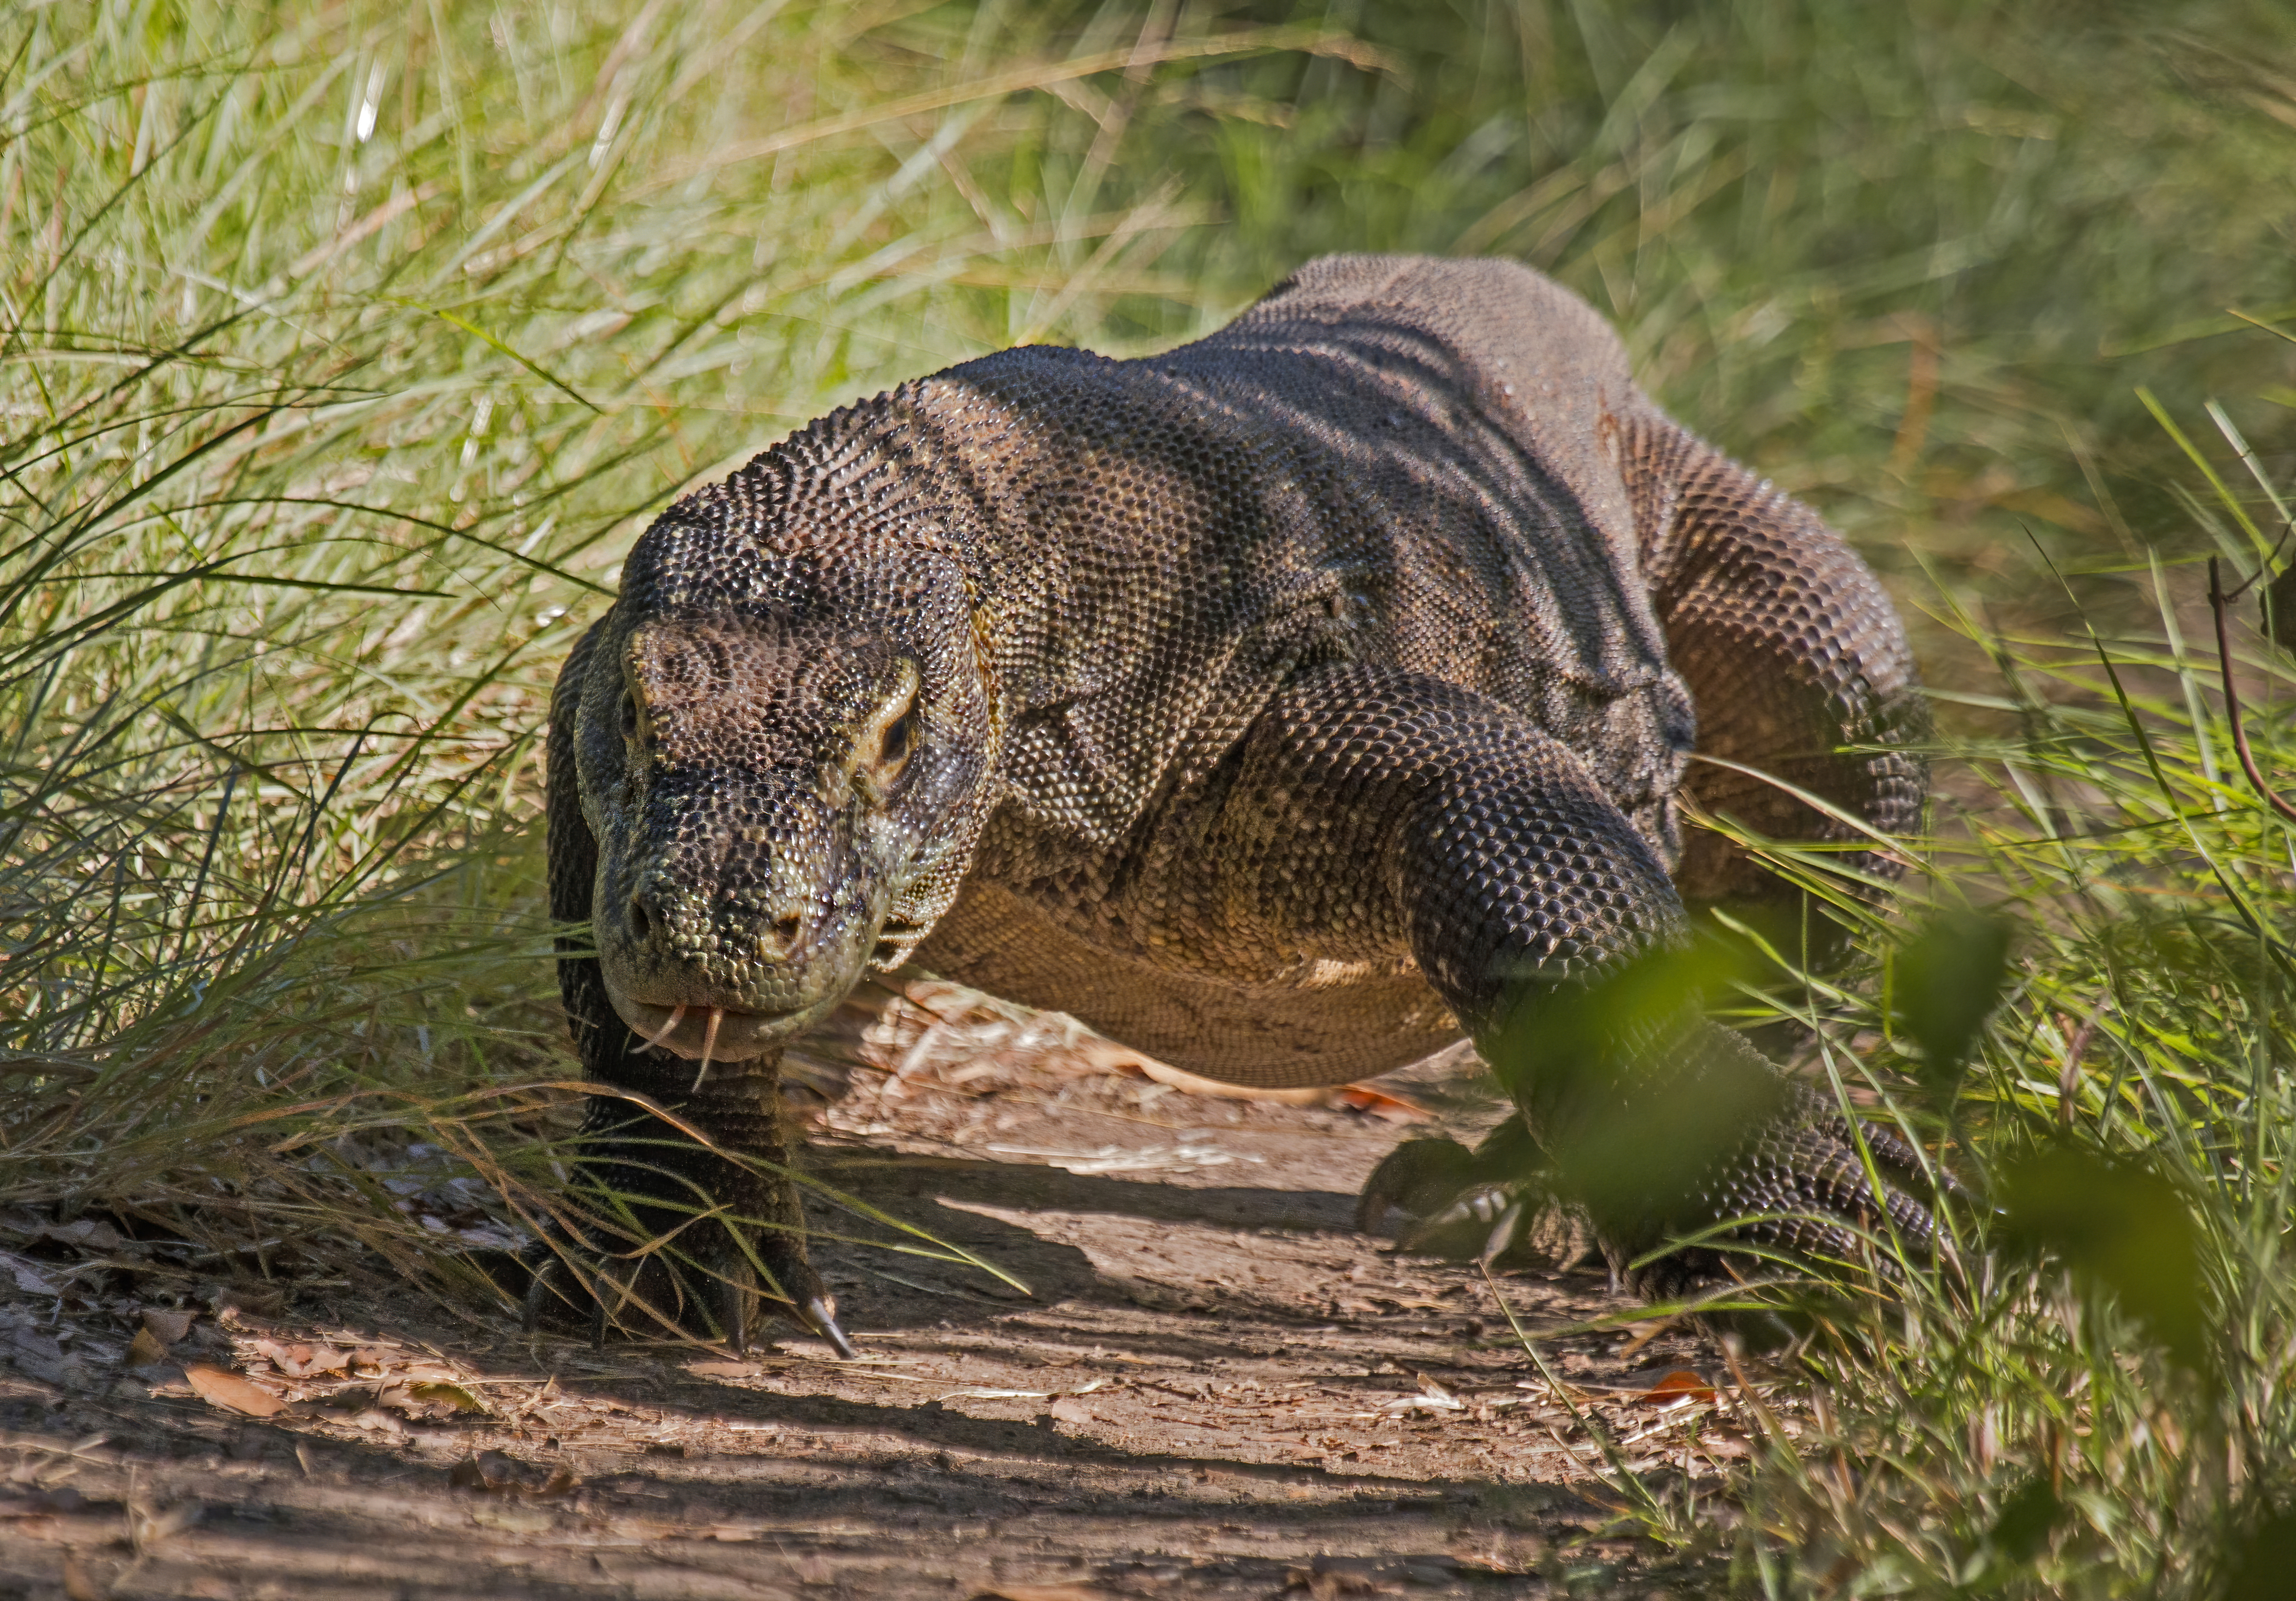 What order does the Komodo dragon belong to?